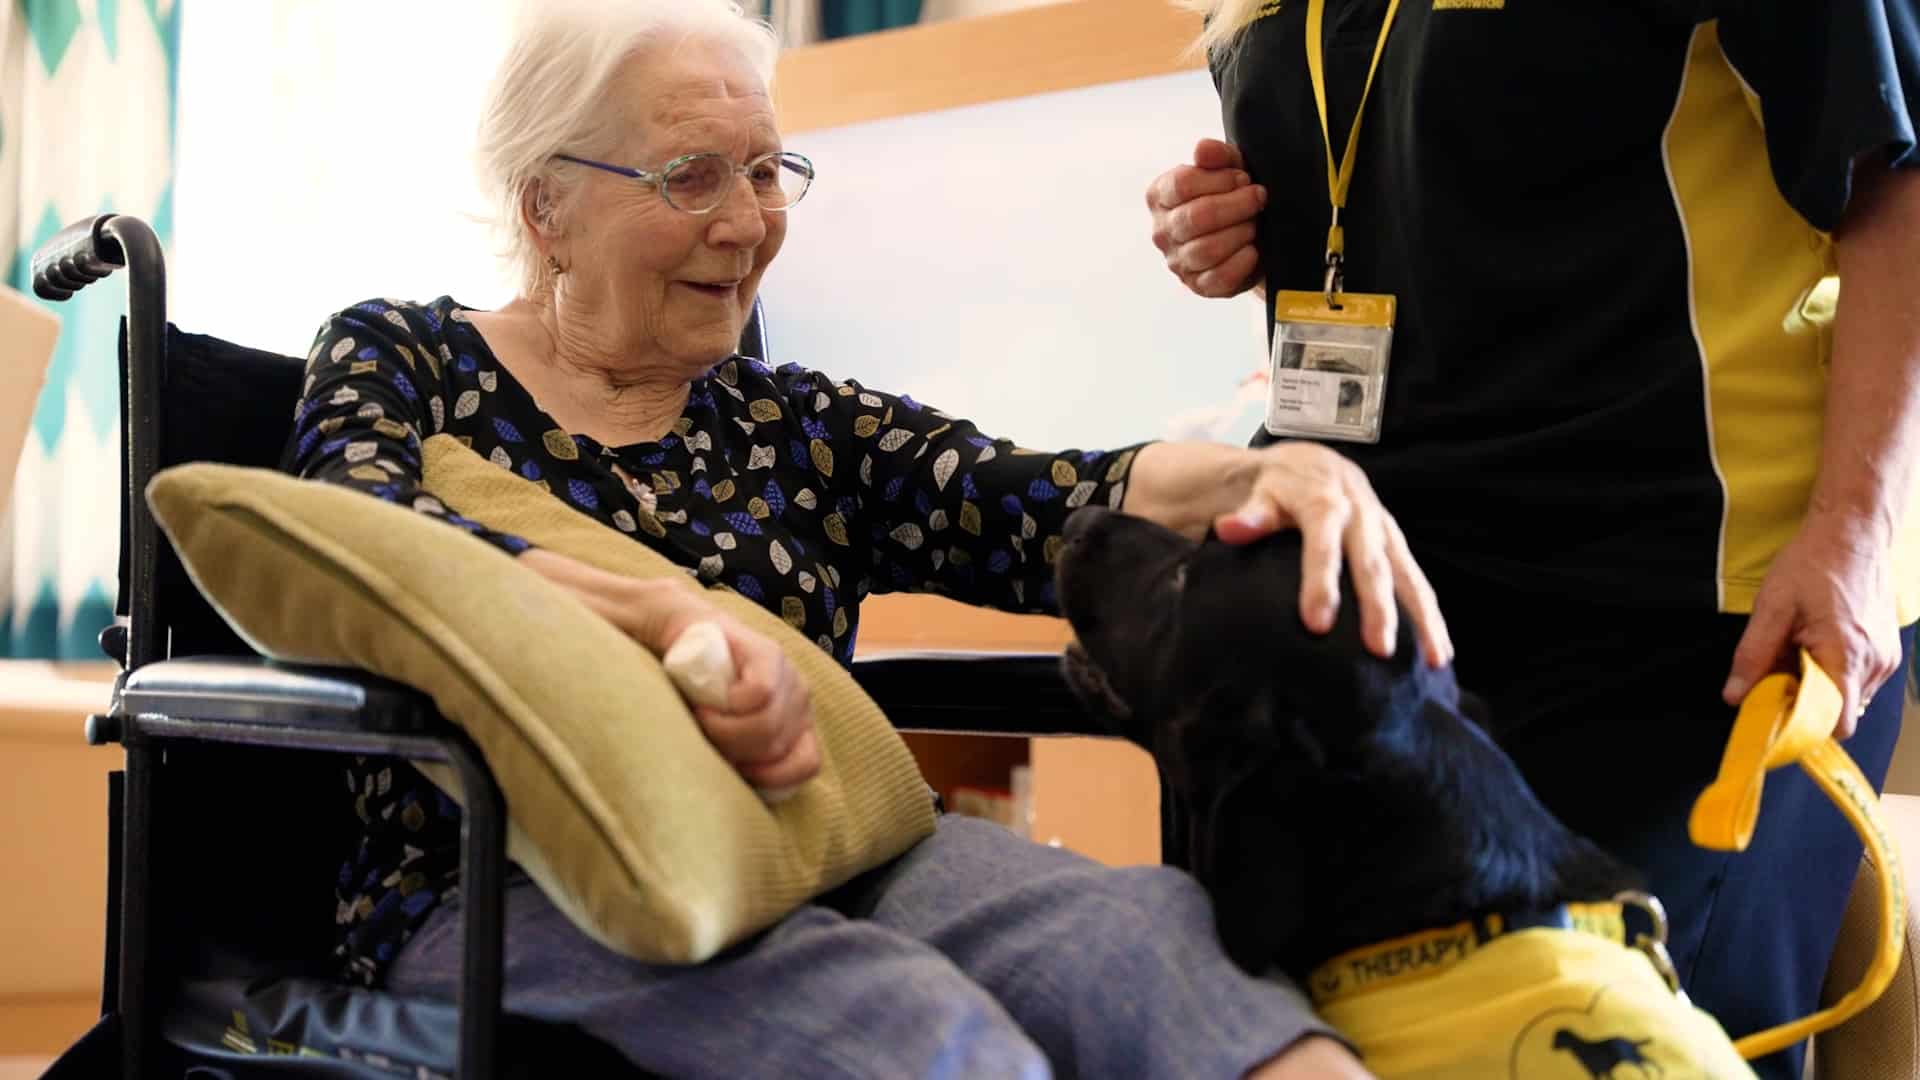 A resident of Lily House Care Home in Ely enjoying some time with the pet therapy do Donatello.